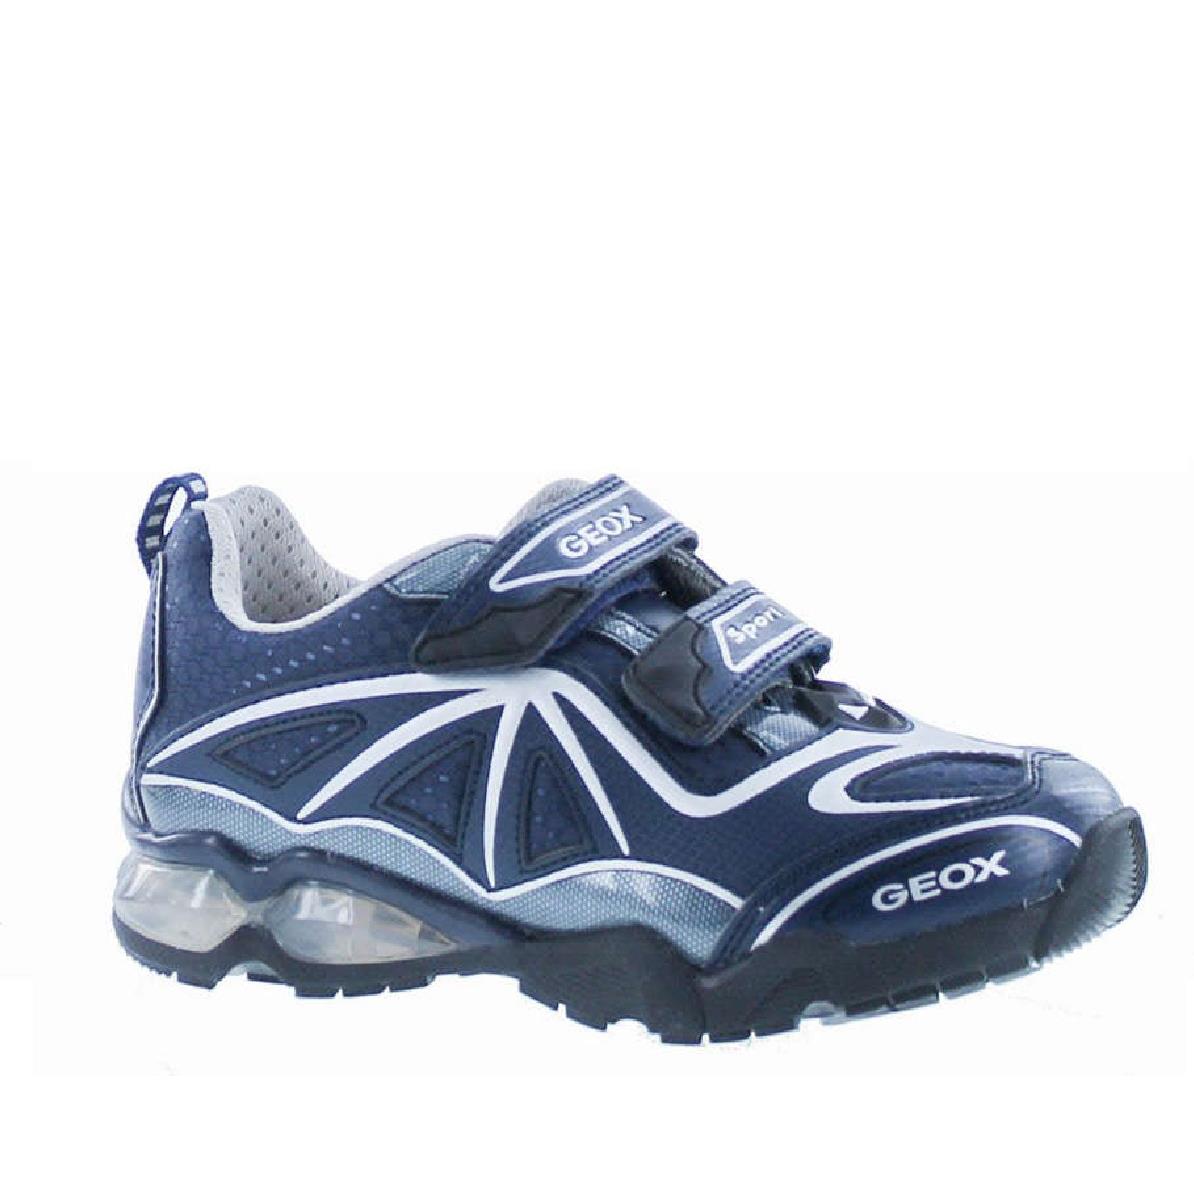 Geox Boys Eclipse Breatheable Fashion Light Up Sneakers Navy/Silver